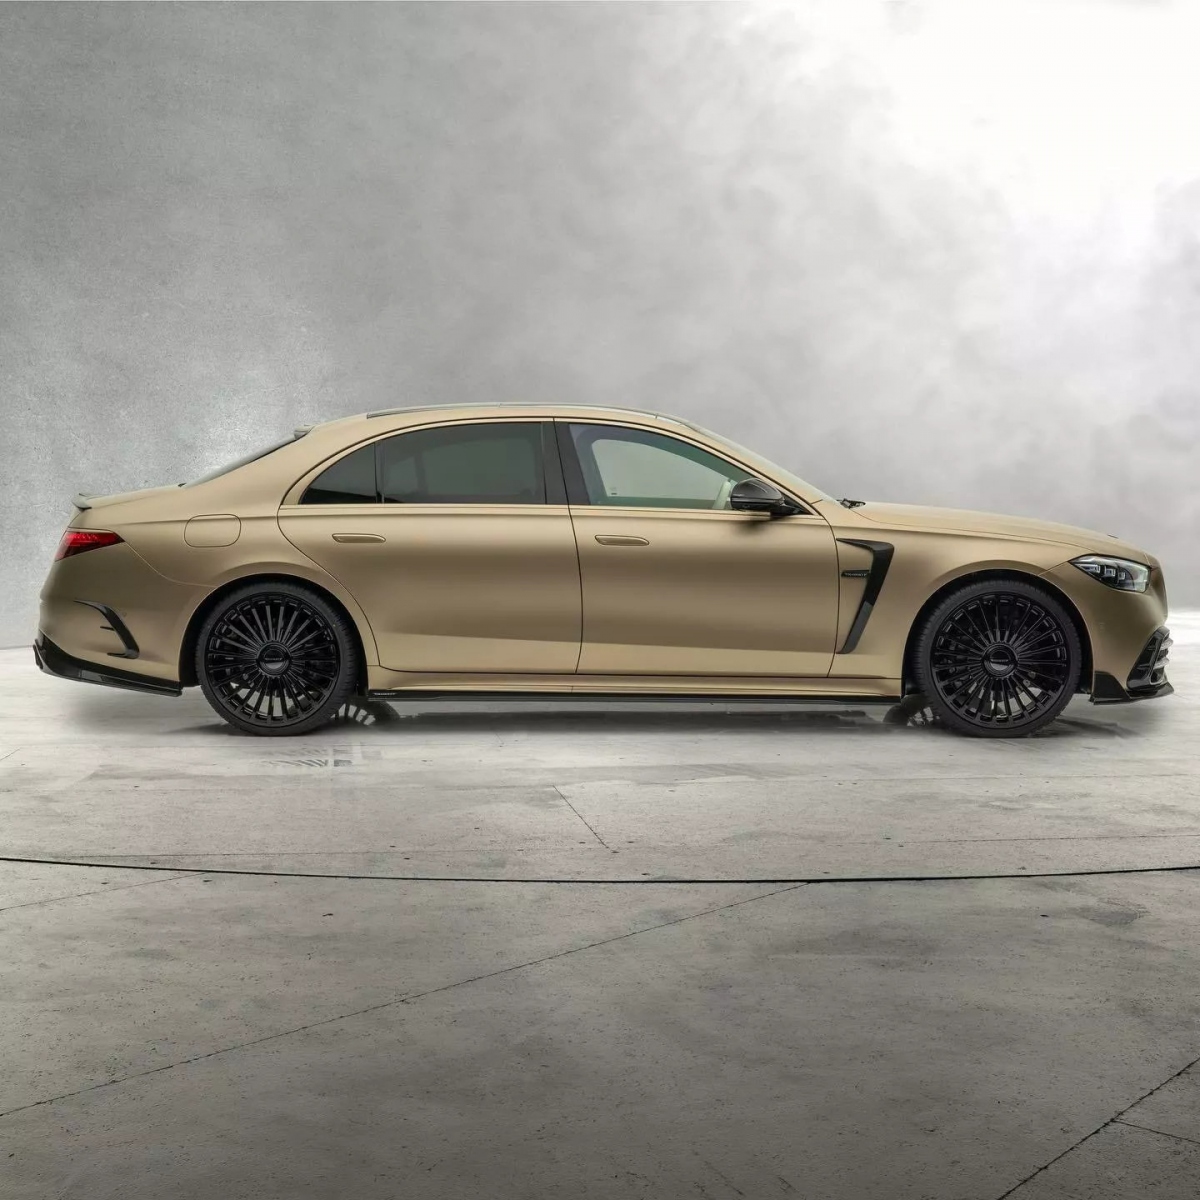 chiem nguong mercedes s-class phien ban do mansory day sang trong hinh anh 2